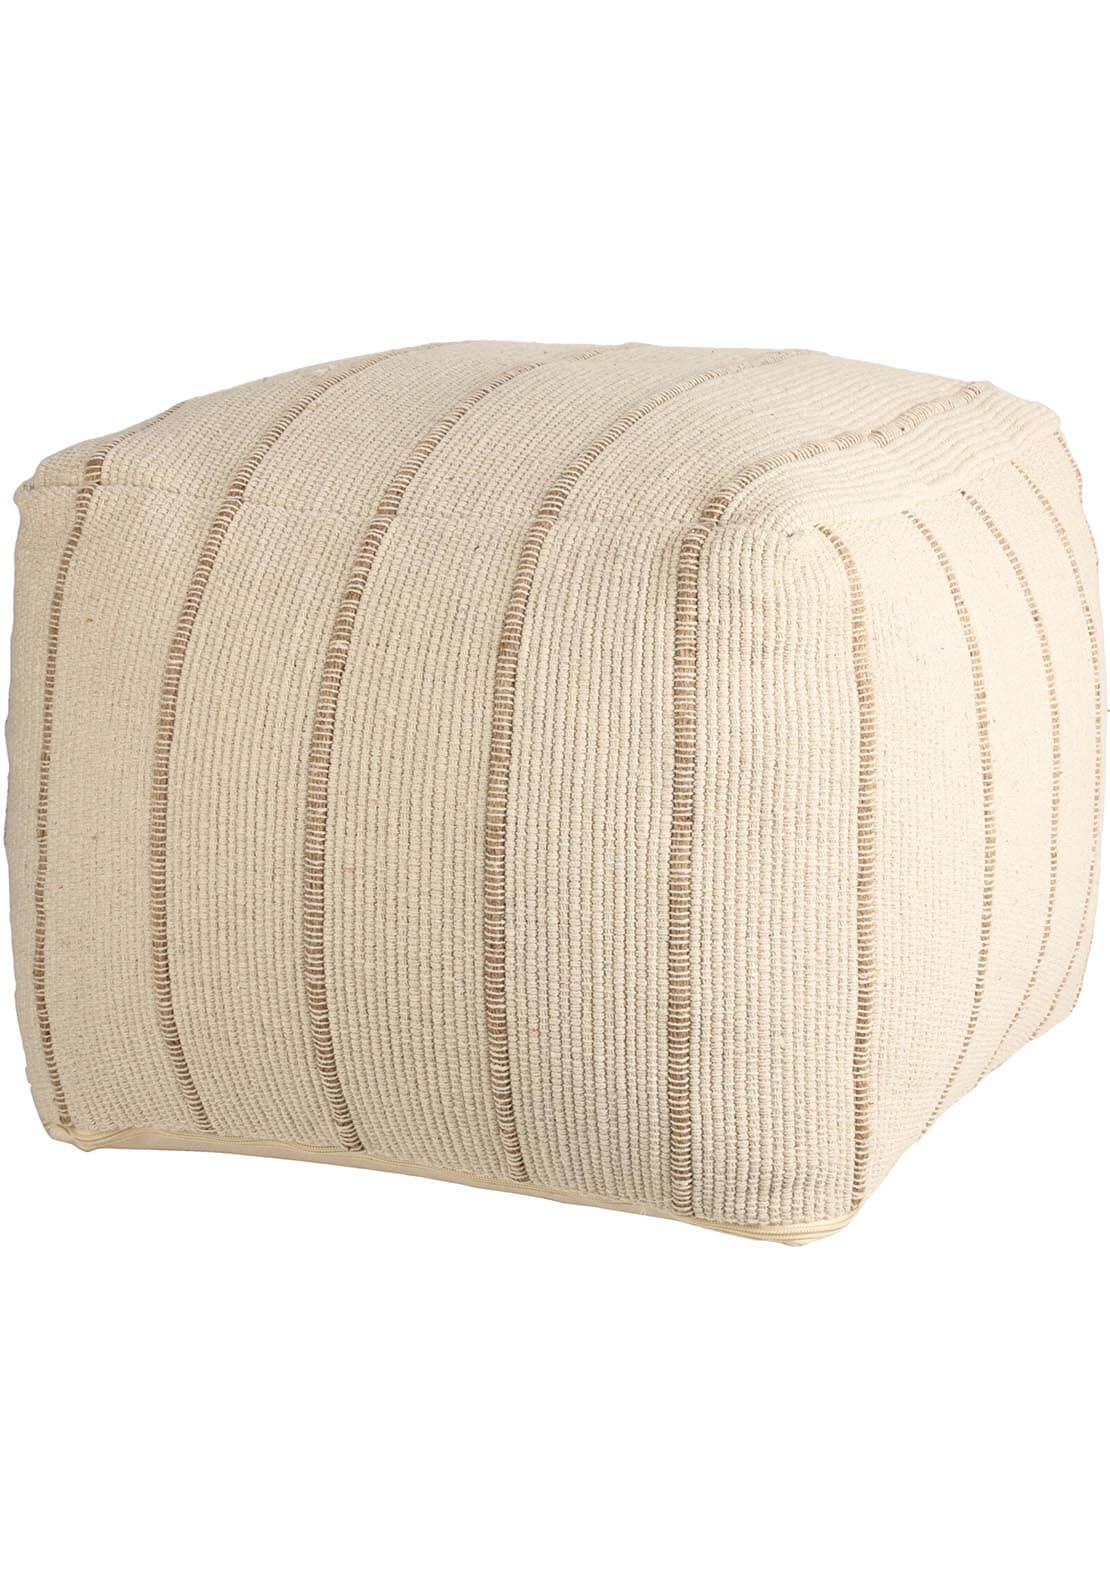 The Home Garden Lined Pouf 45 x 35cm 1 Shaws Department Stores